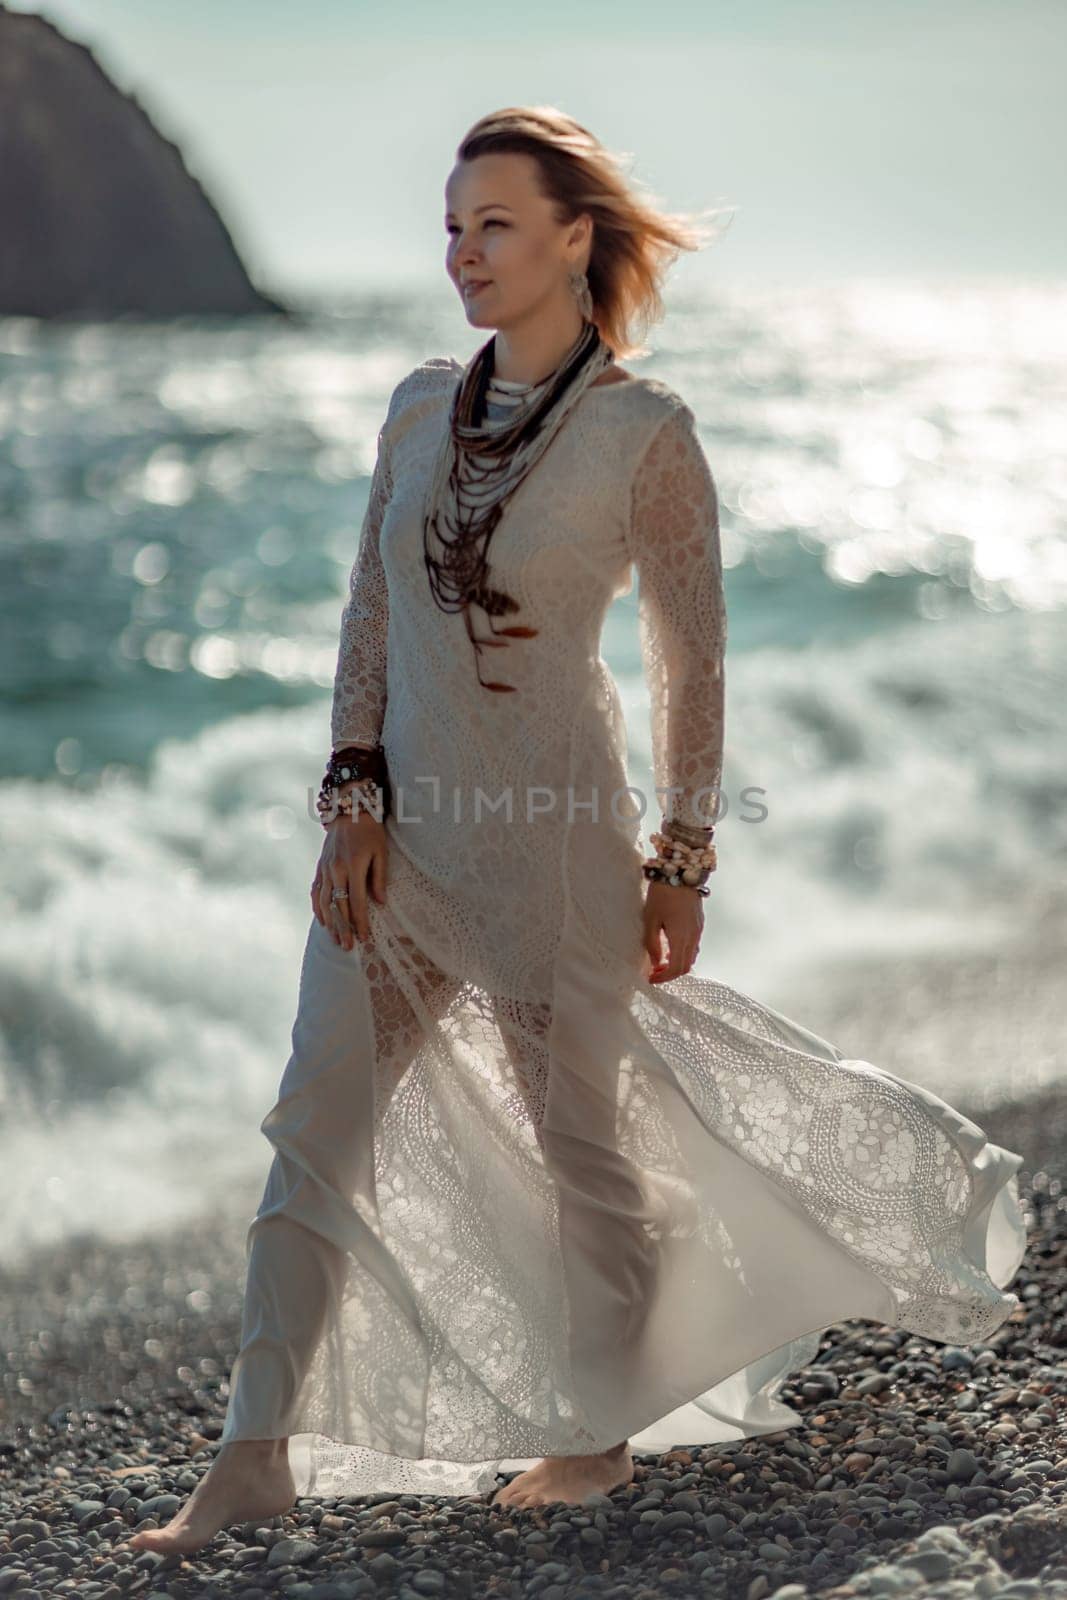 Woman beach sea white dress. The middle-aged looks good with blonde hair, boho style in a white long dress with beach decorations on the neck and arms. by Matiunina